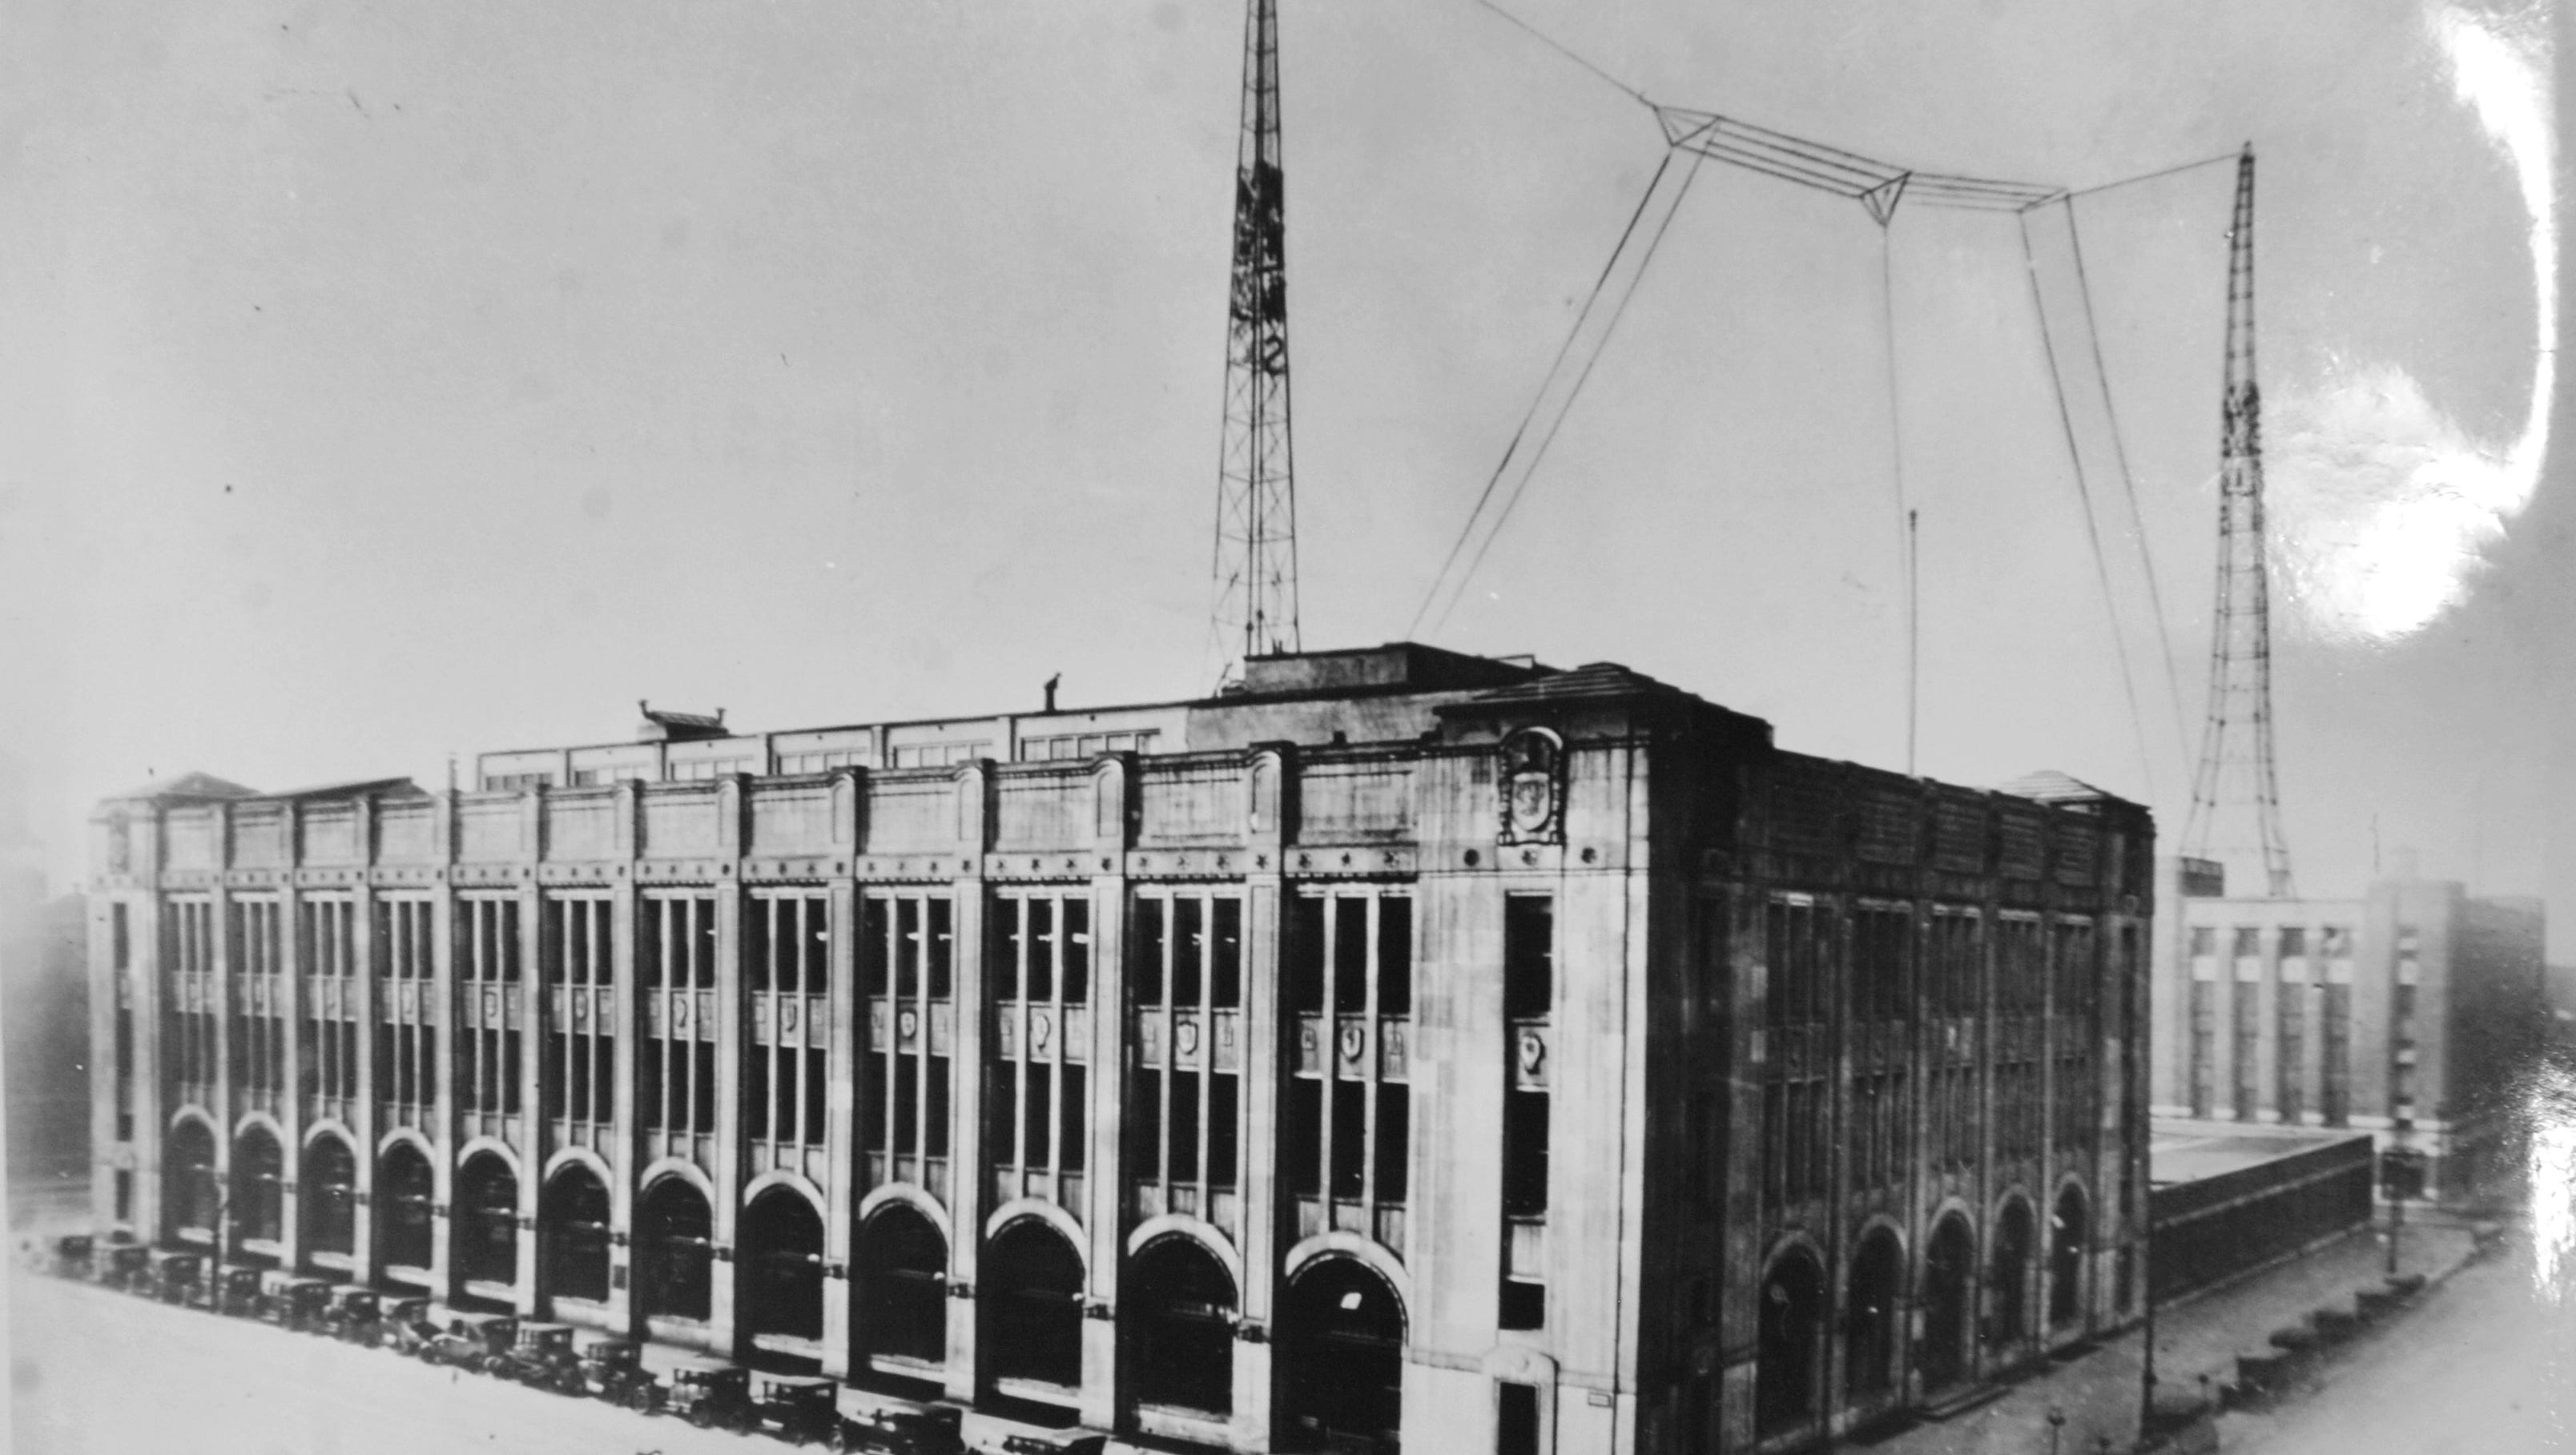 This view of The Detroit News building in November 1926 shows that a second radio tower had been added on top of the parking garage across Third Street. It rose 265 feet above street level.